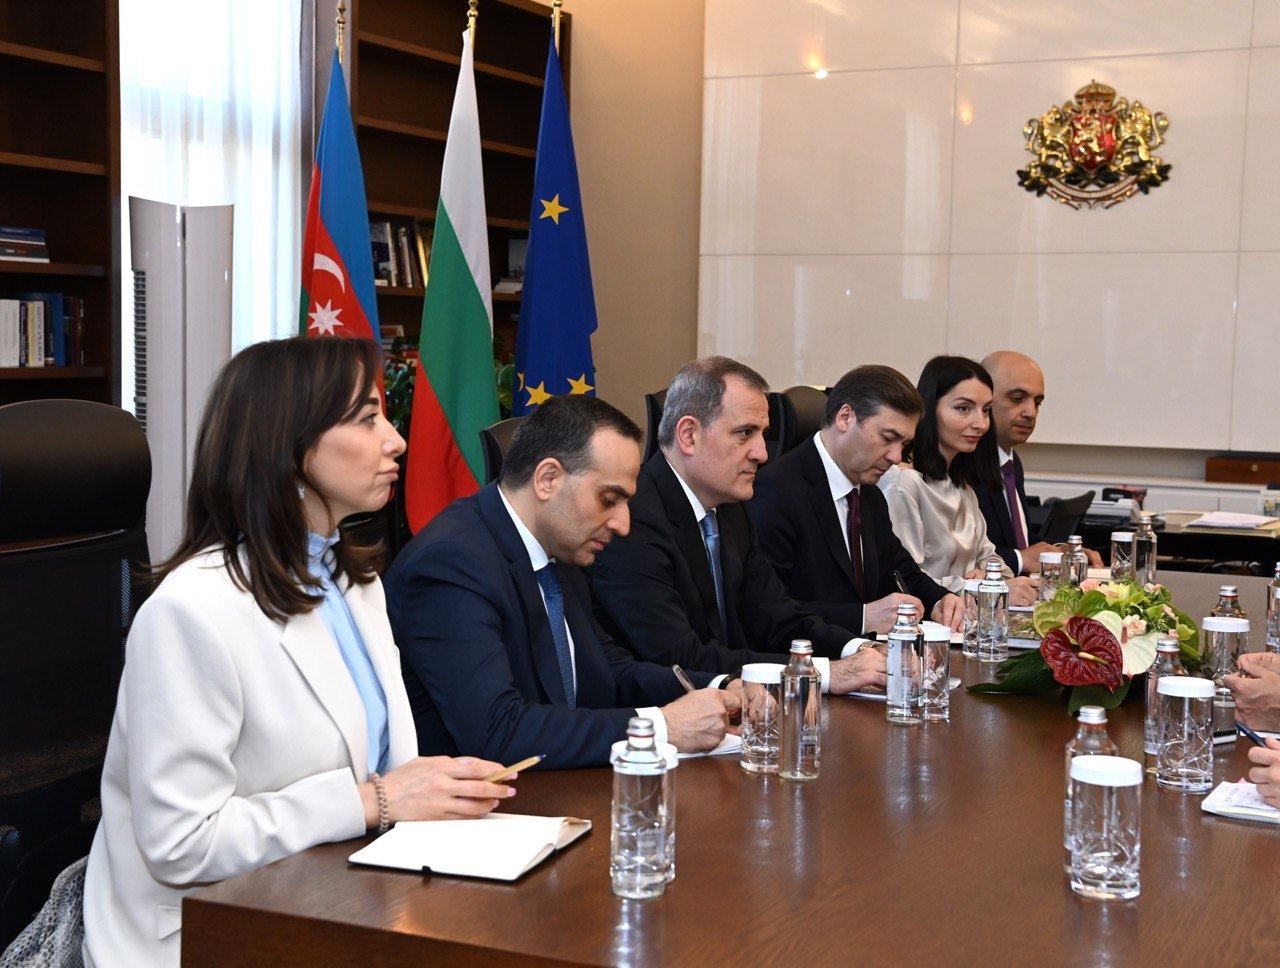 Azerbaijani foreign minister in Bulgaria discussing expanding comprehensive ties [PHOTO]